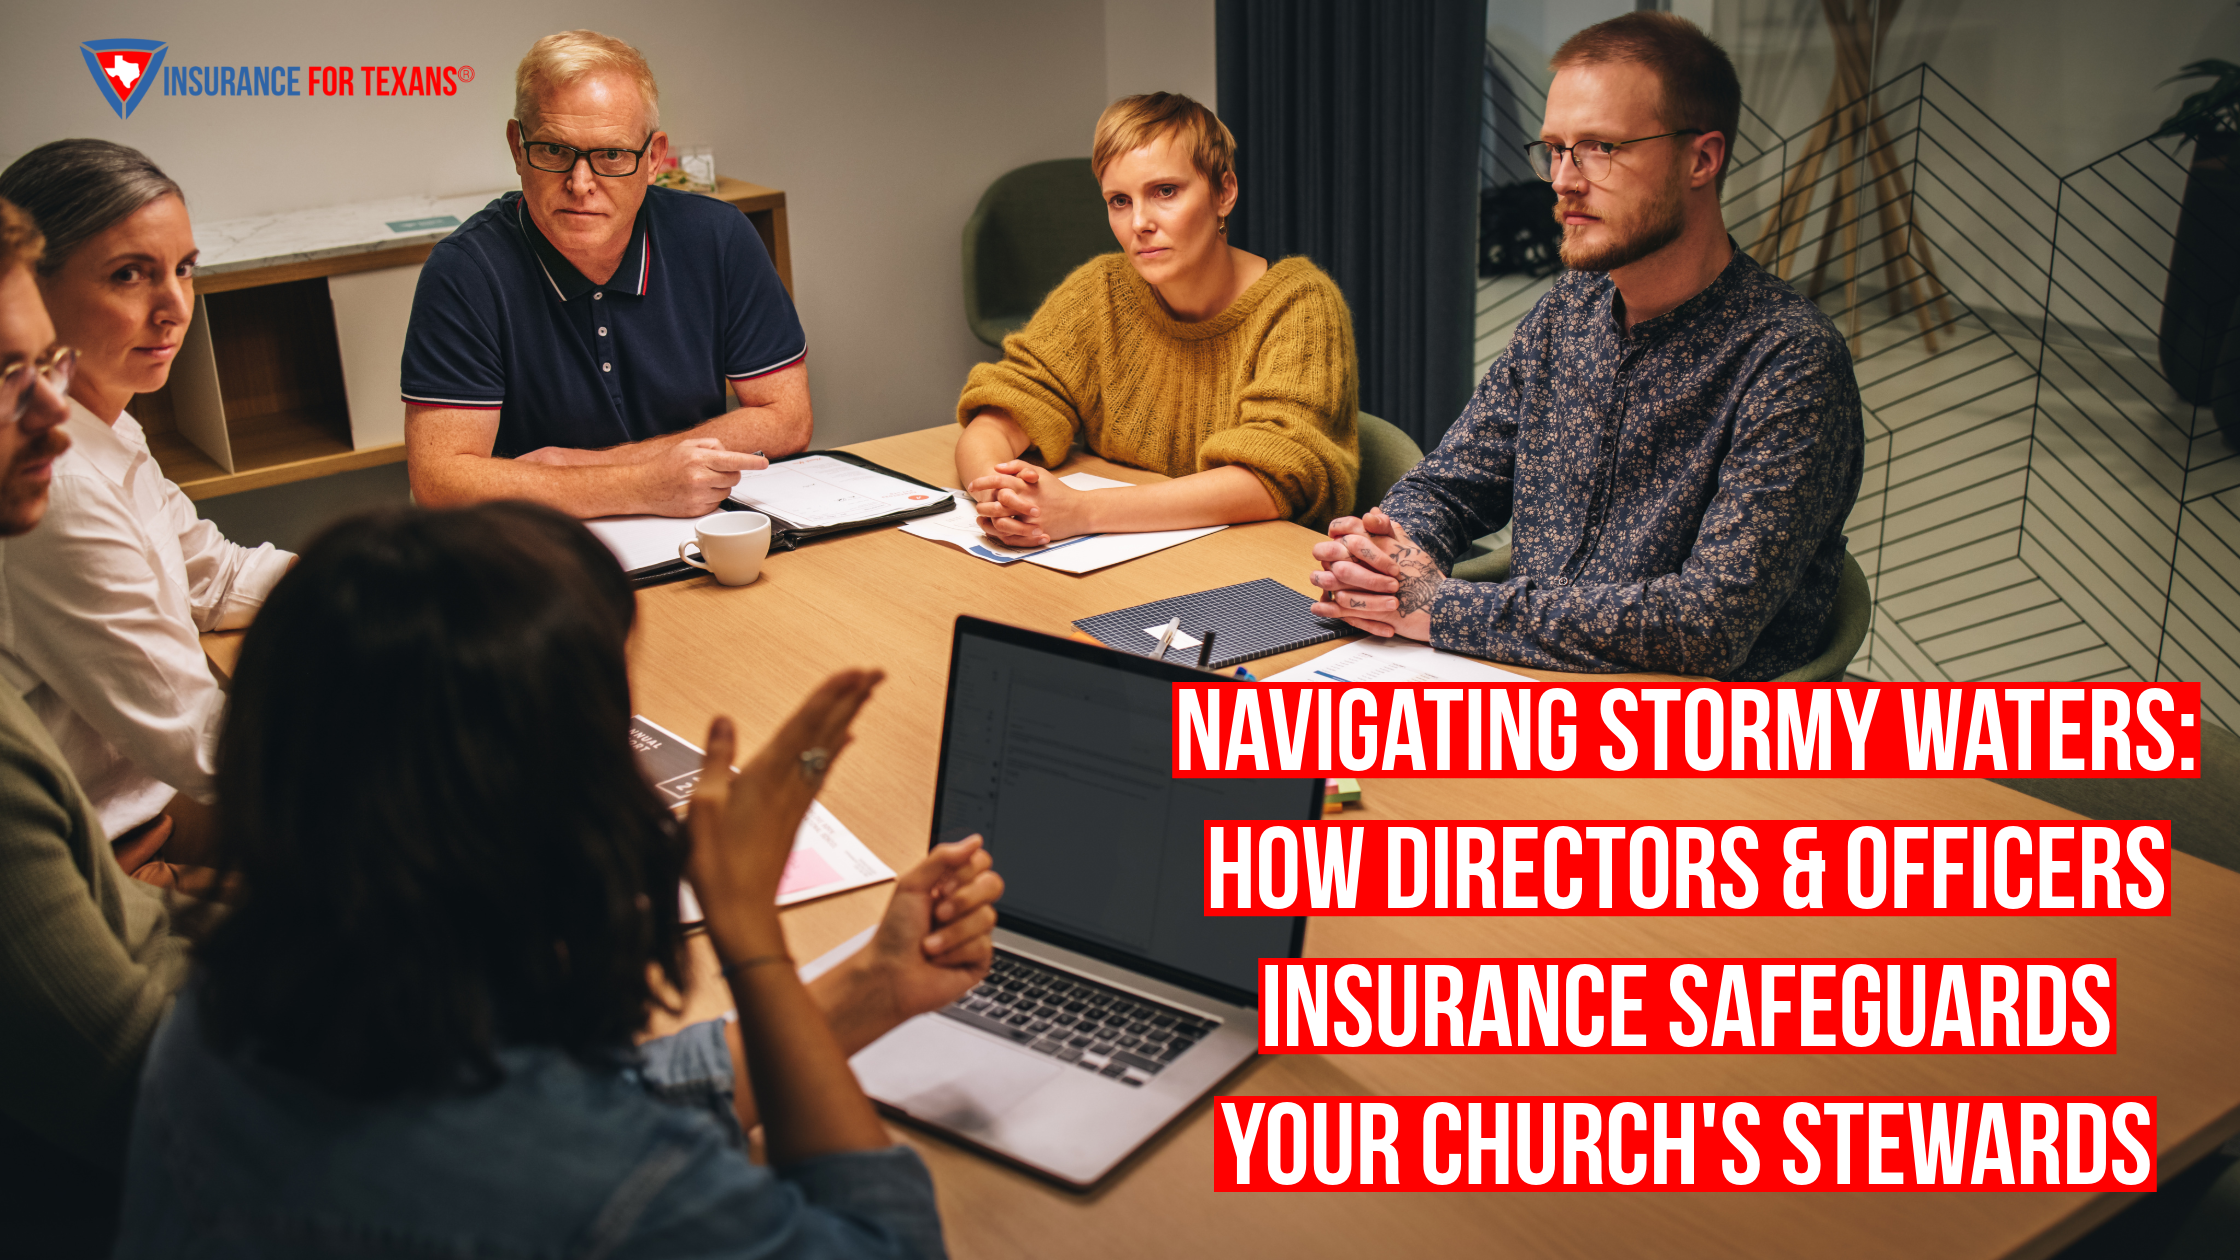 How Directors & Officers Insurance Safeguards Your Church's Stewards